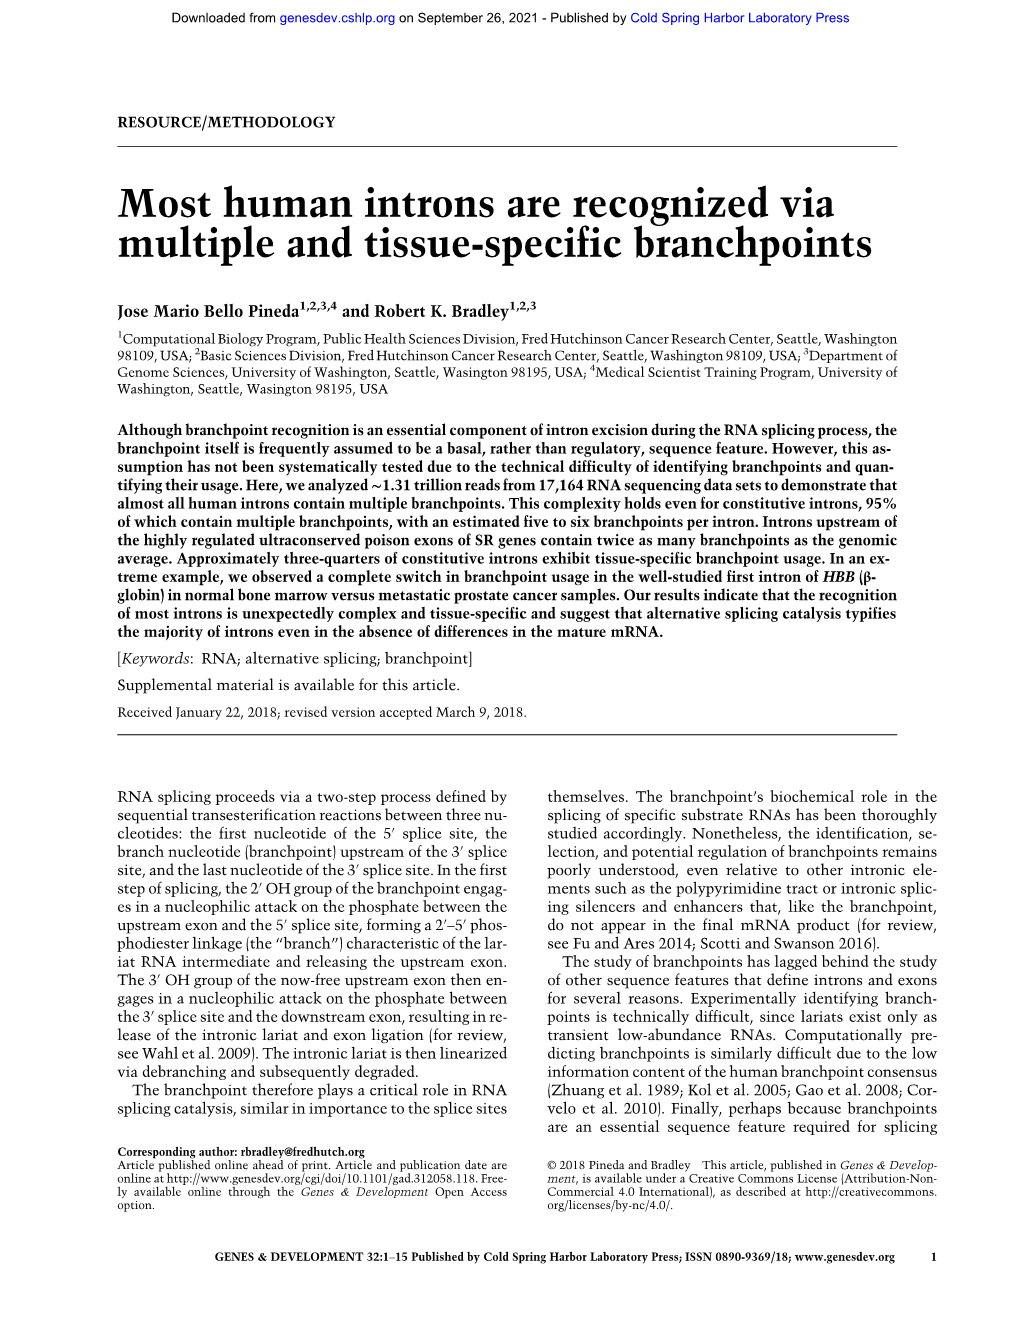 Most Human Introns Are Recognized Via Multiple and Tissue-Specific Branchpoints